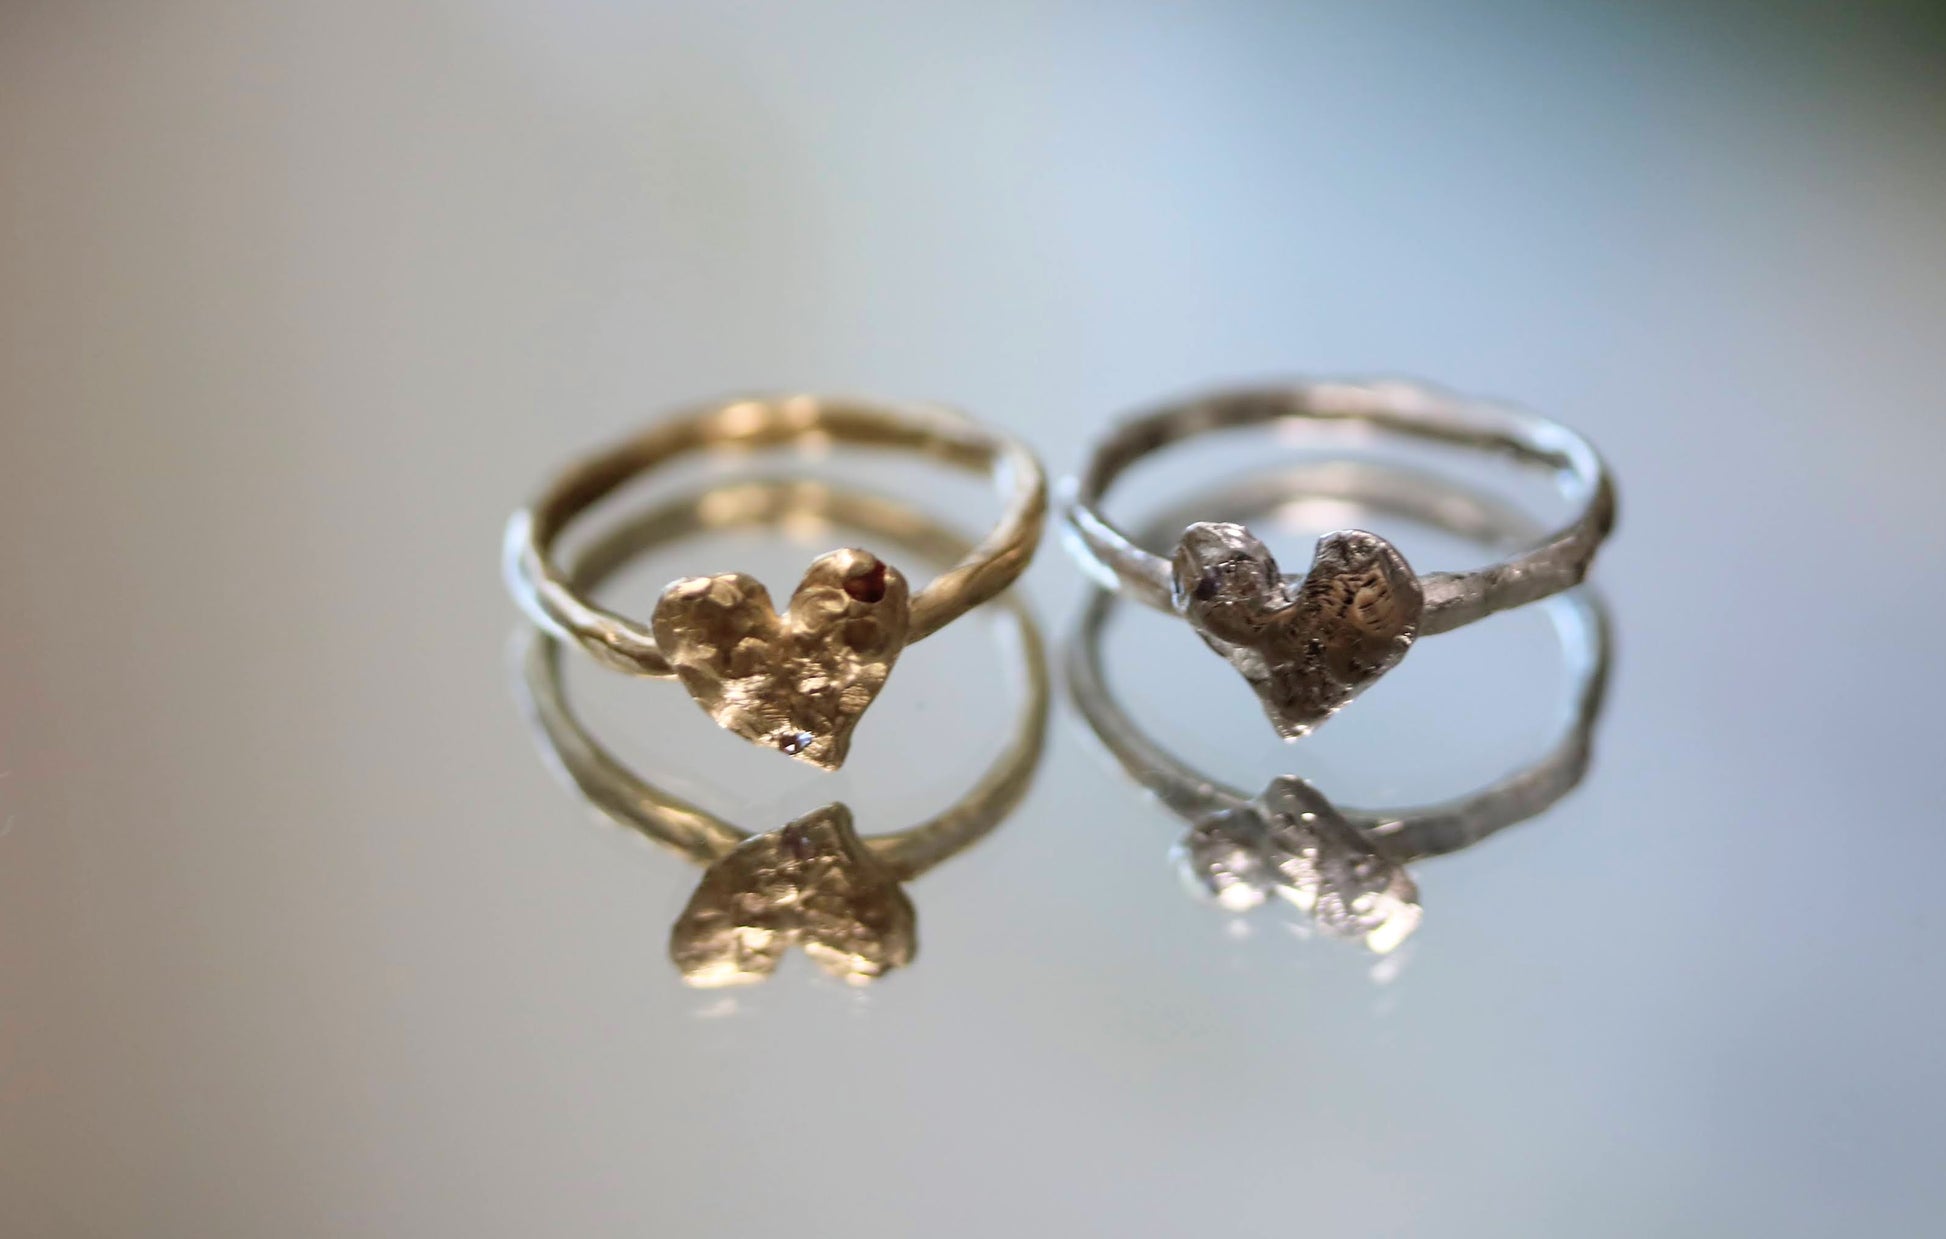 Heart shaped rings in gold and silver